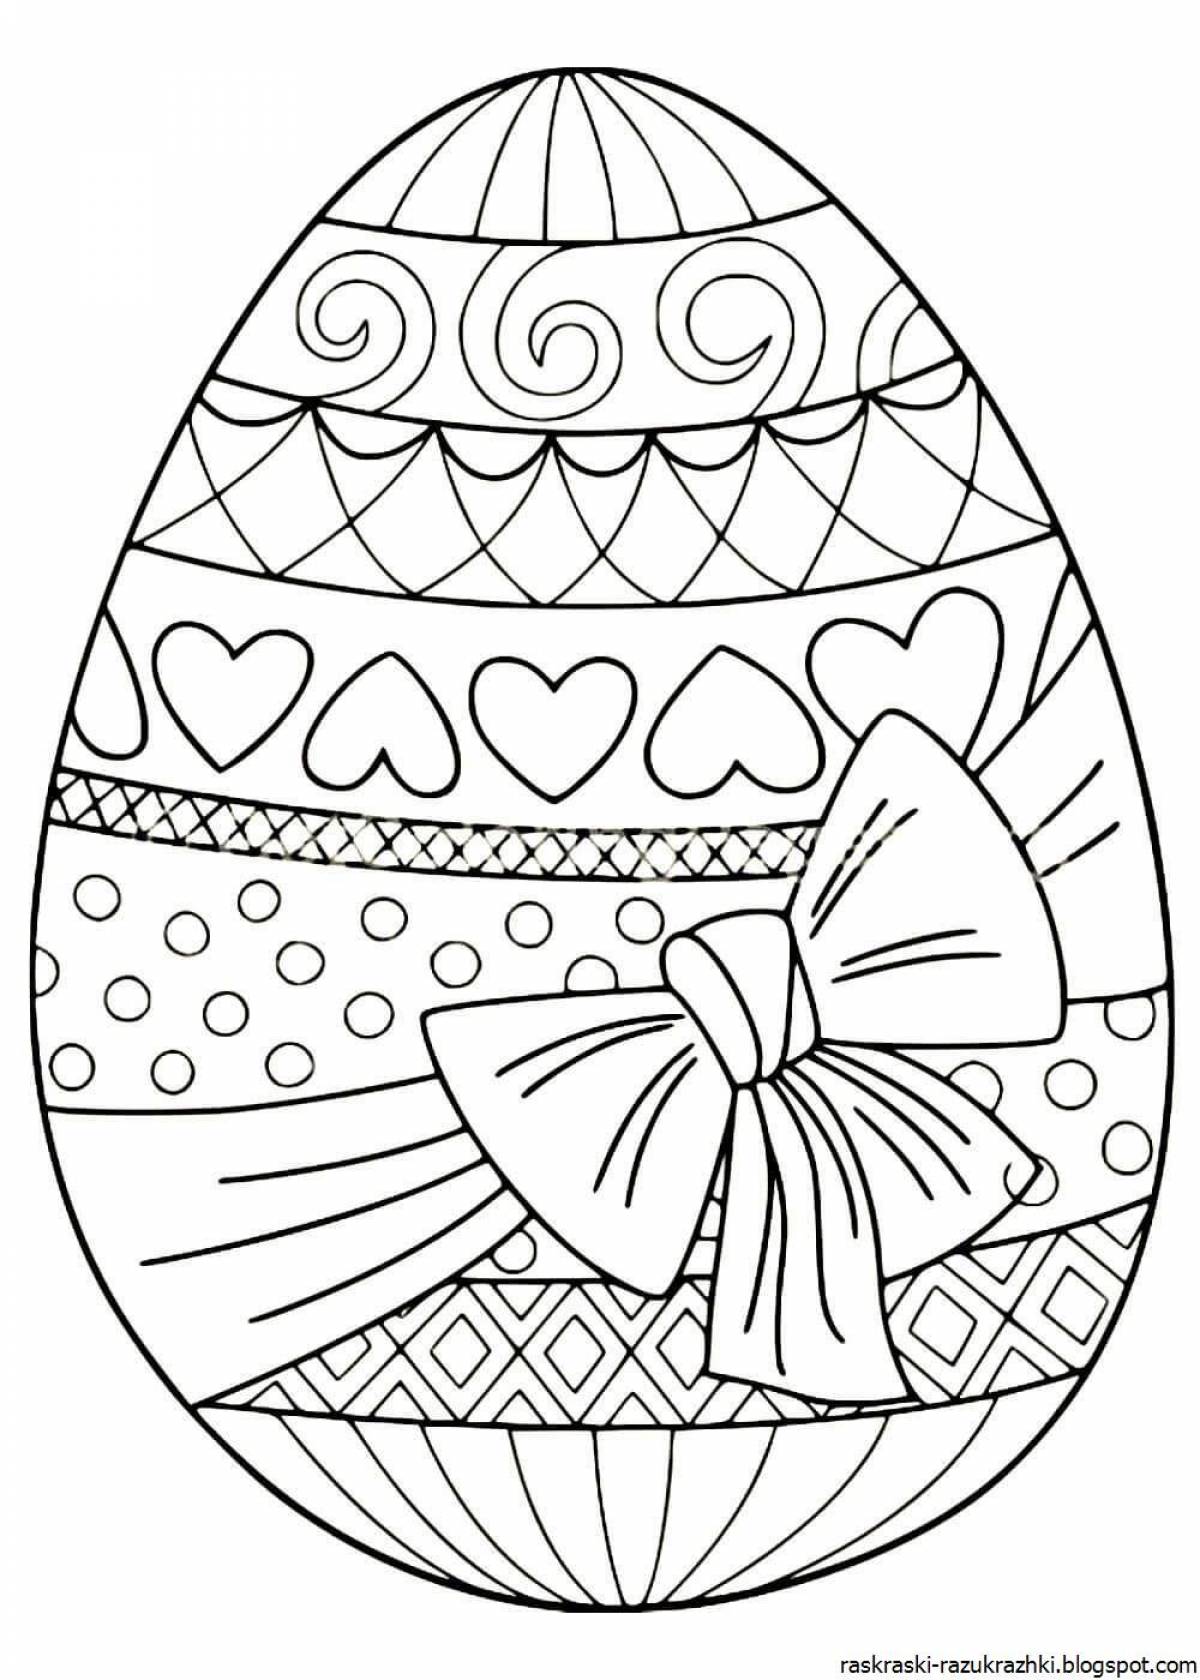 Exquisite coloring egg